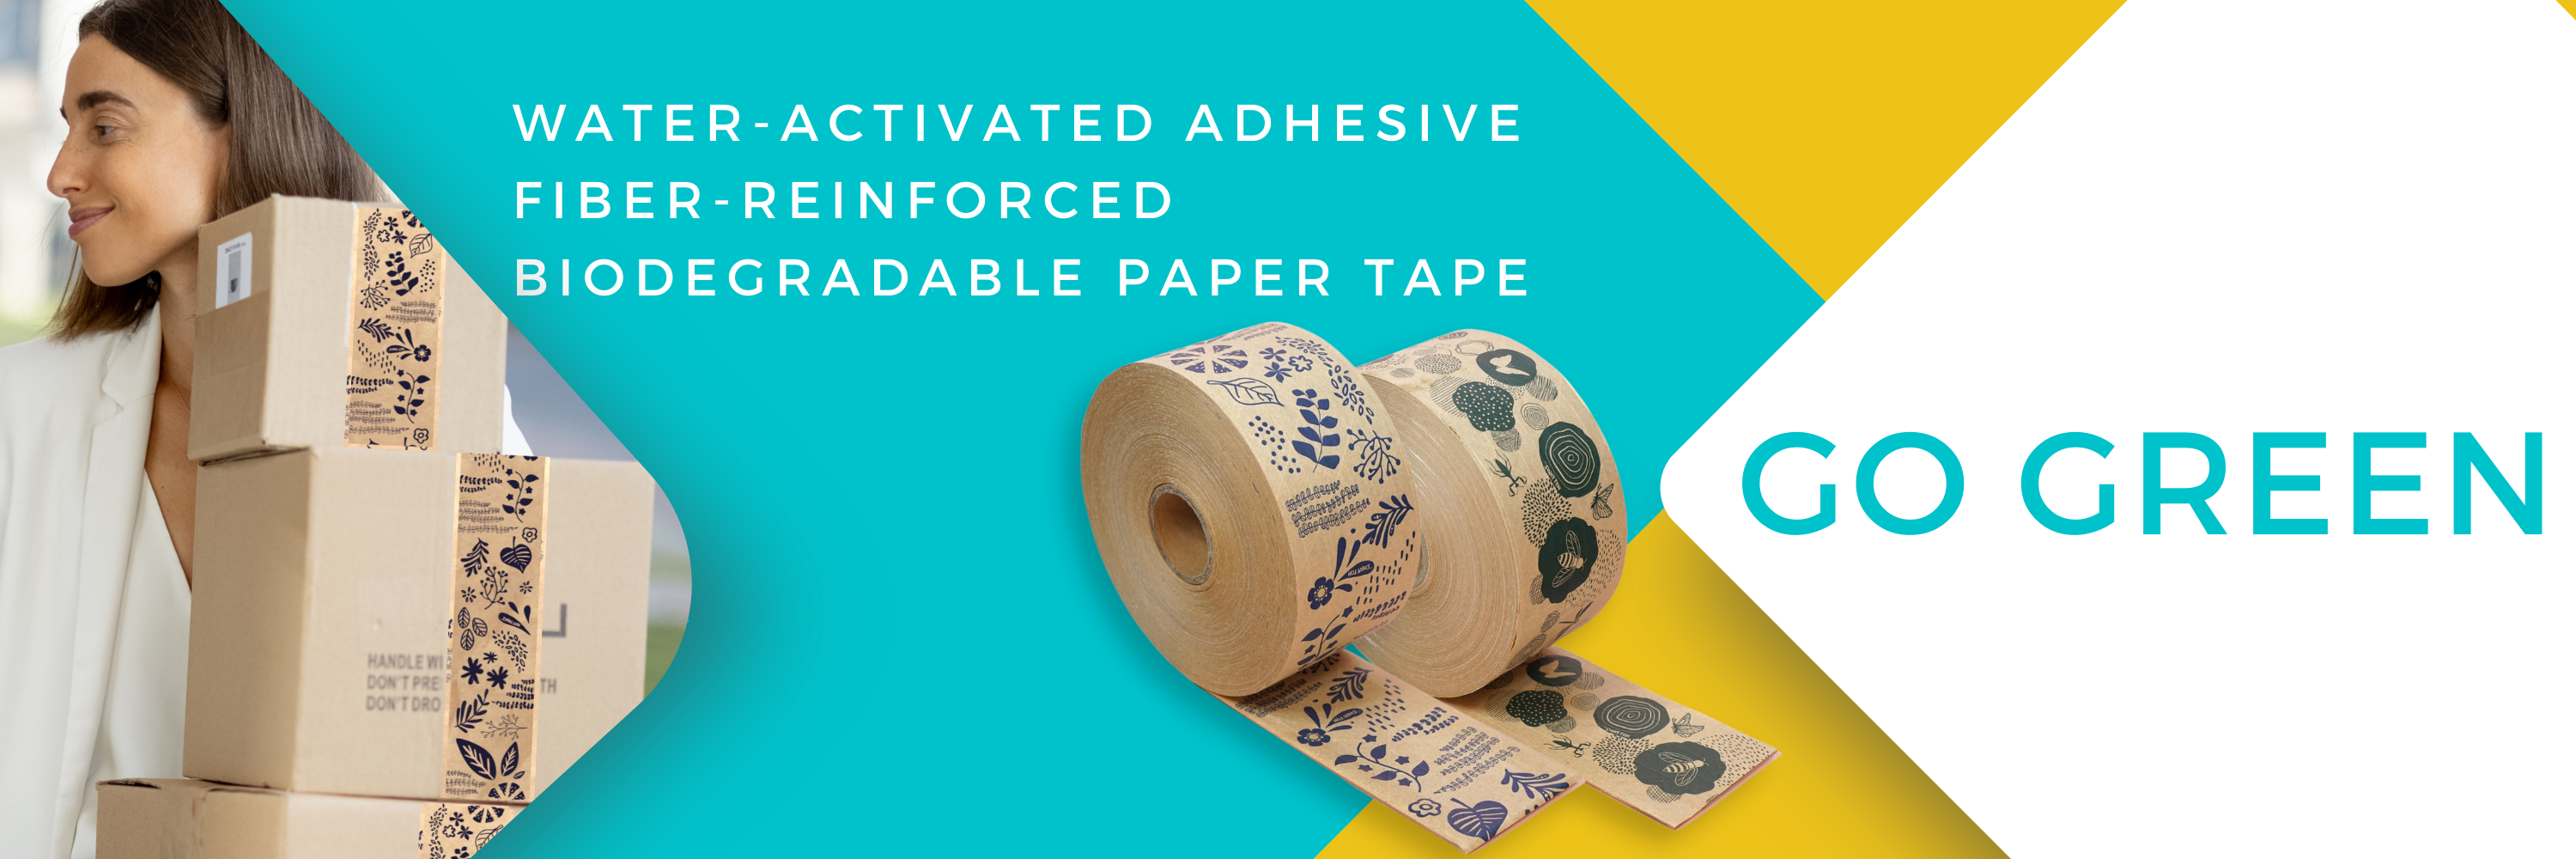 Hot Pawz Decorative Packing Tape Cute Packaging Tape Water Activated Fiber Reinforced Paper Tape